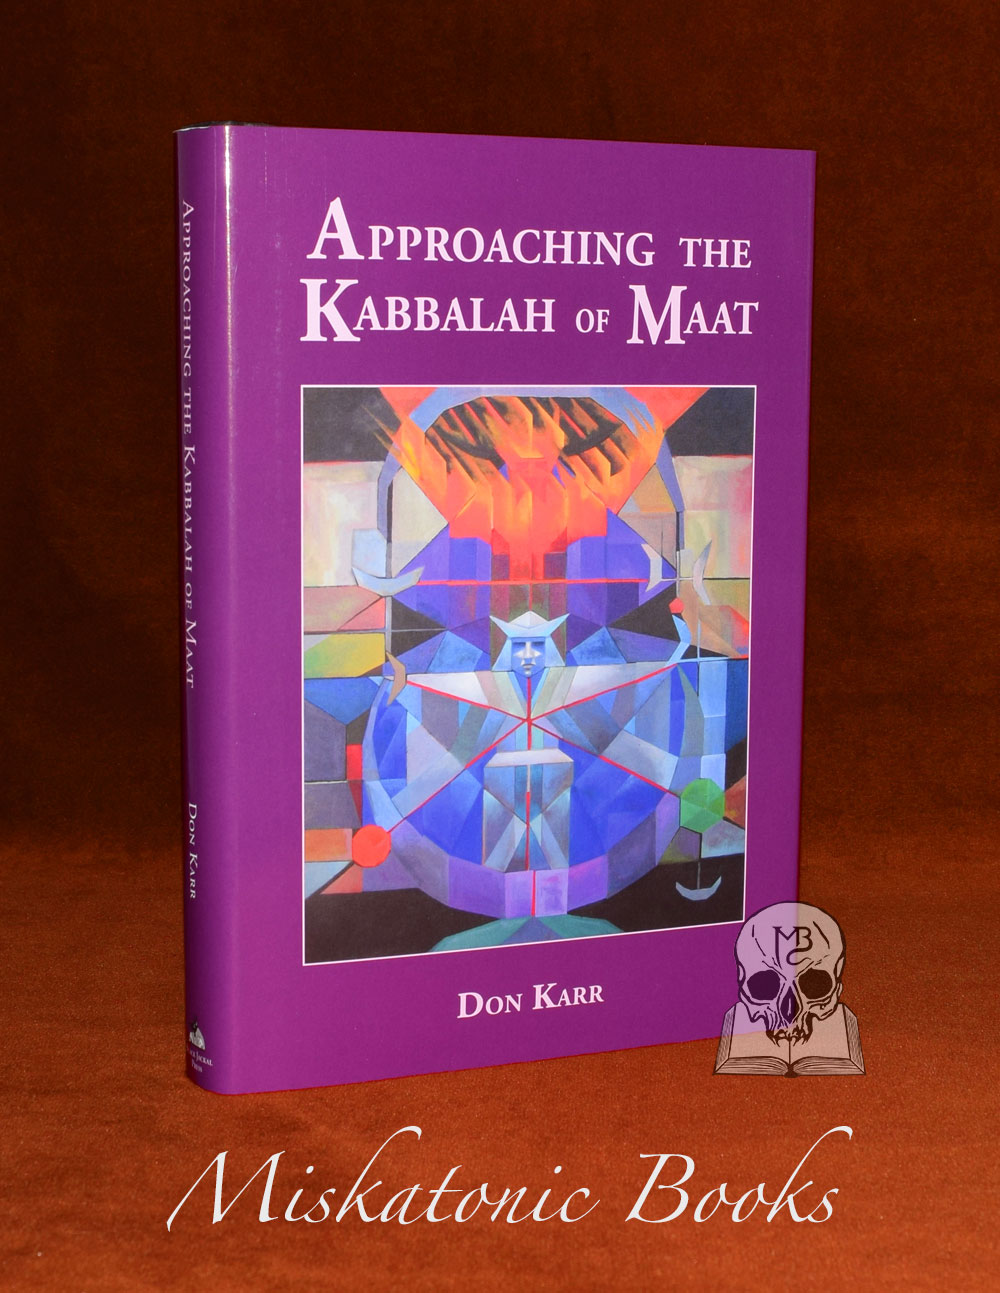 APPROACHING THE KABBALAH OF MAAT by Don Karr (SIGNED Limited Edition Hardcover)